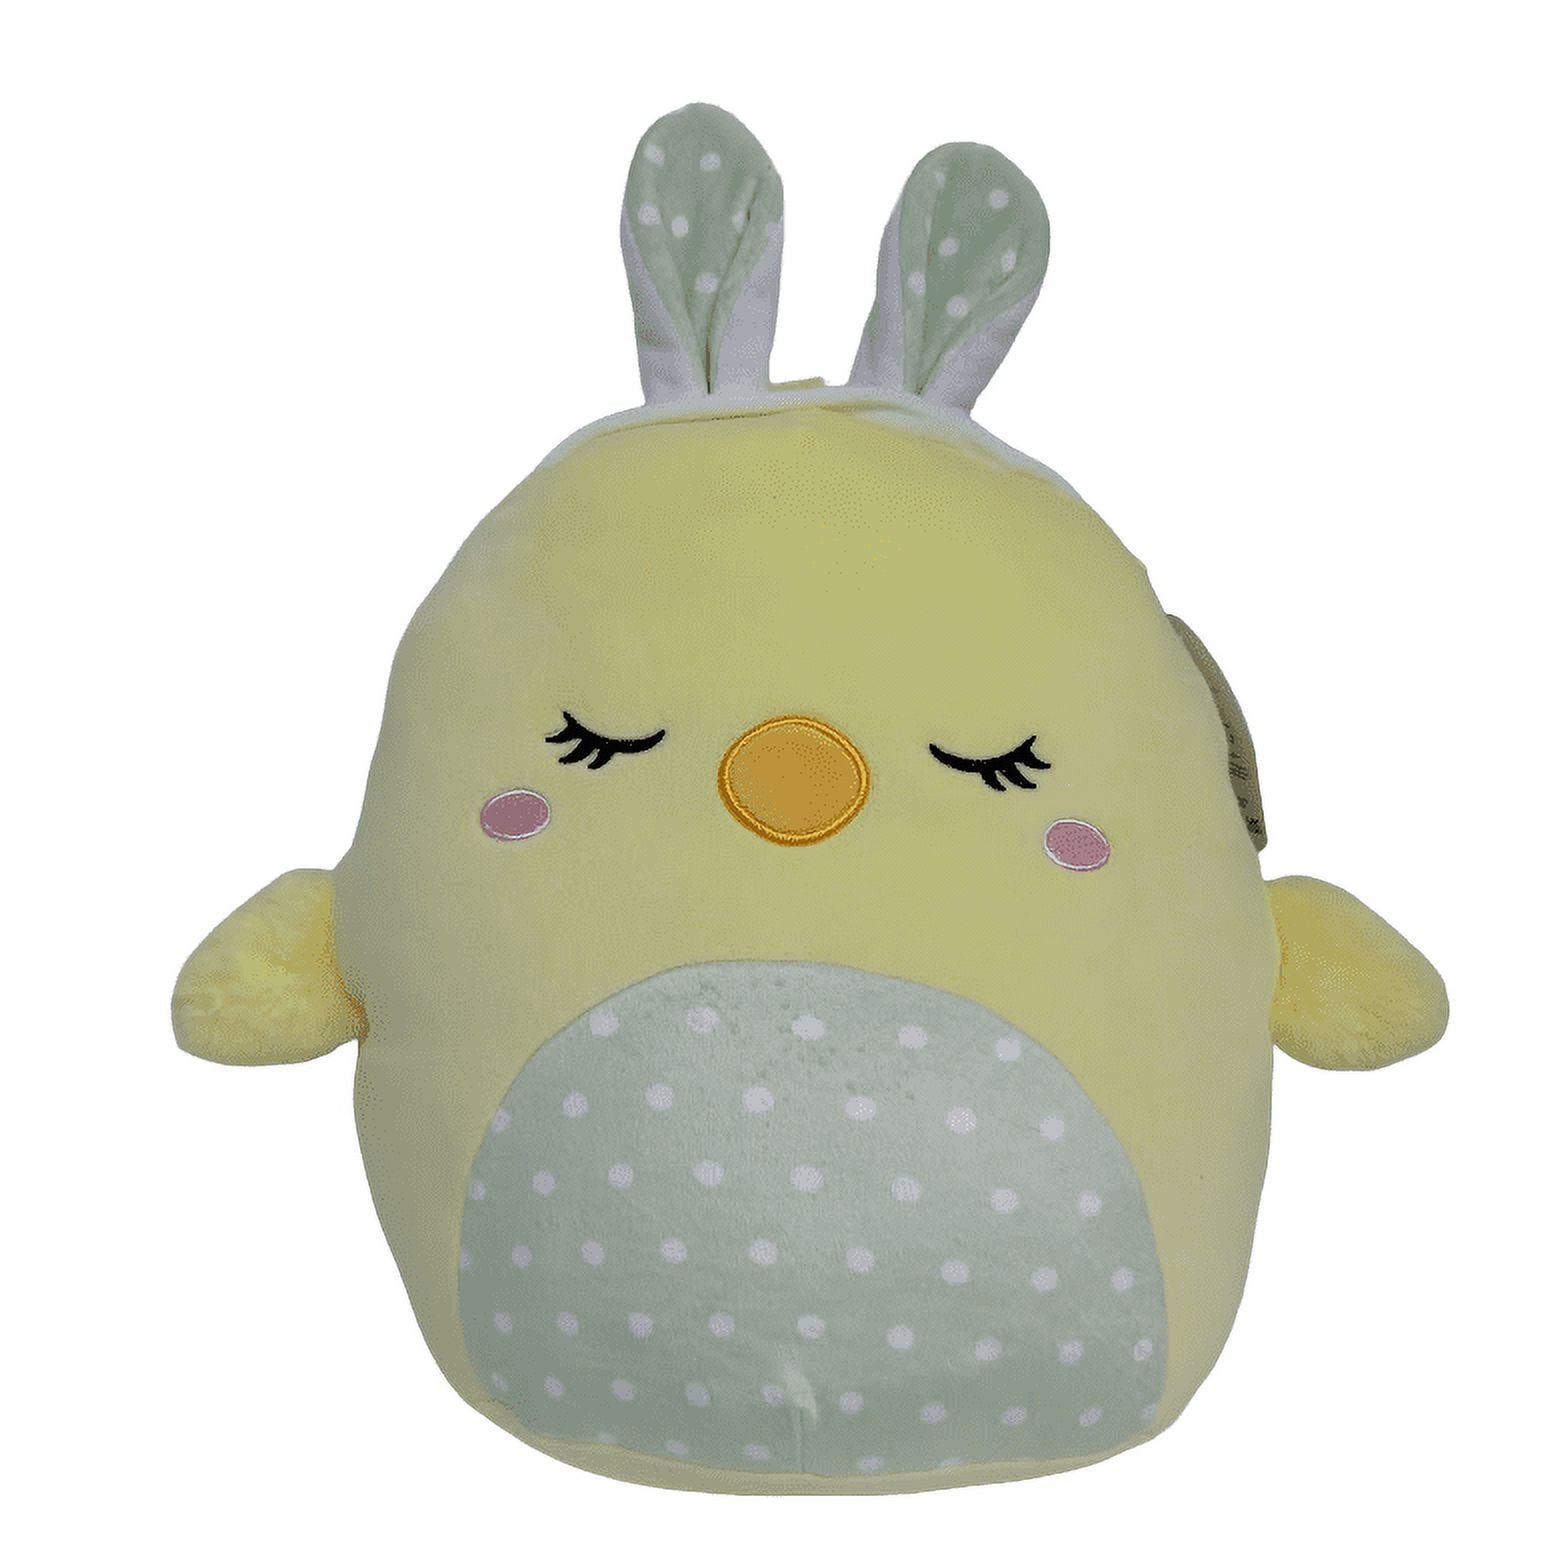 Squishmallows Official Kellytoys Plush 8 Inch Aimee the Yellow